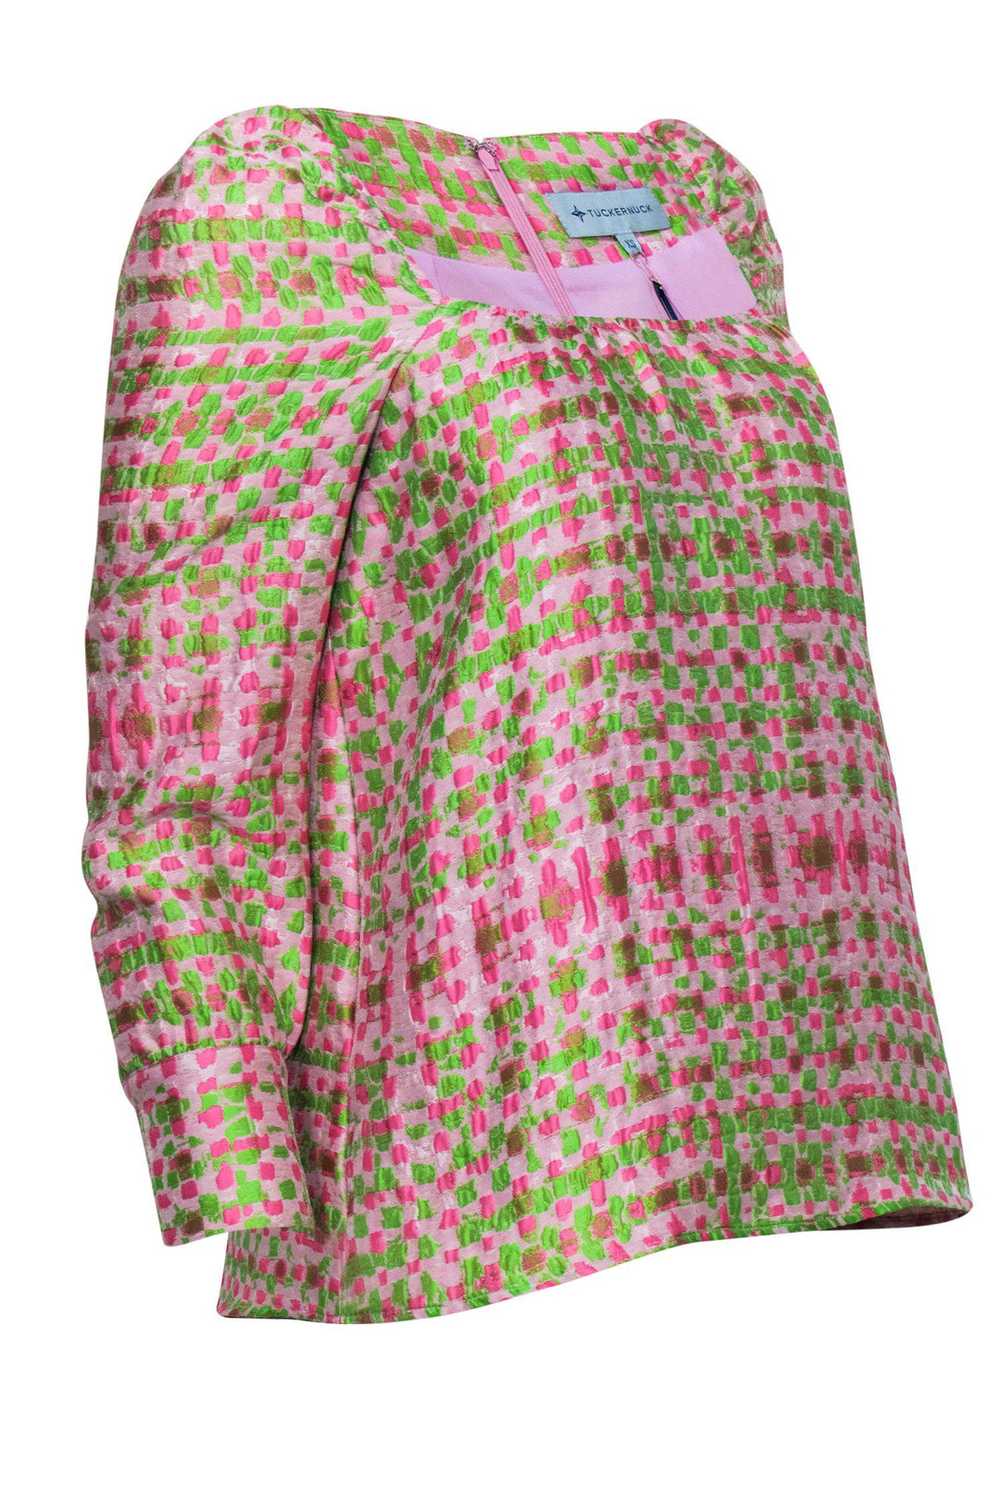 Tuckernuck - Pink & Green Square Neck Textured Bl… - image 2